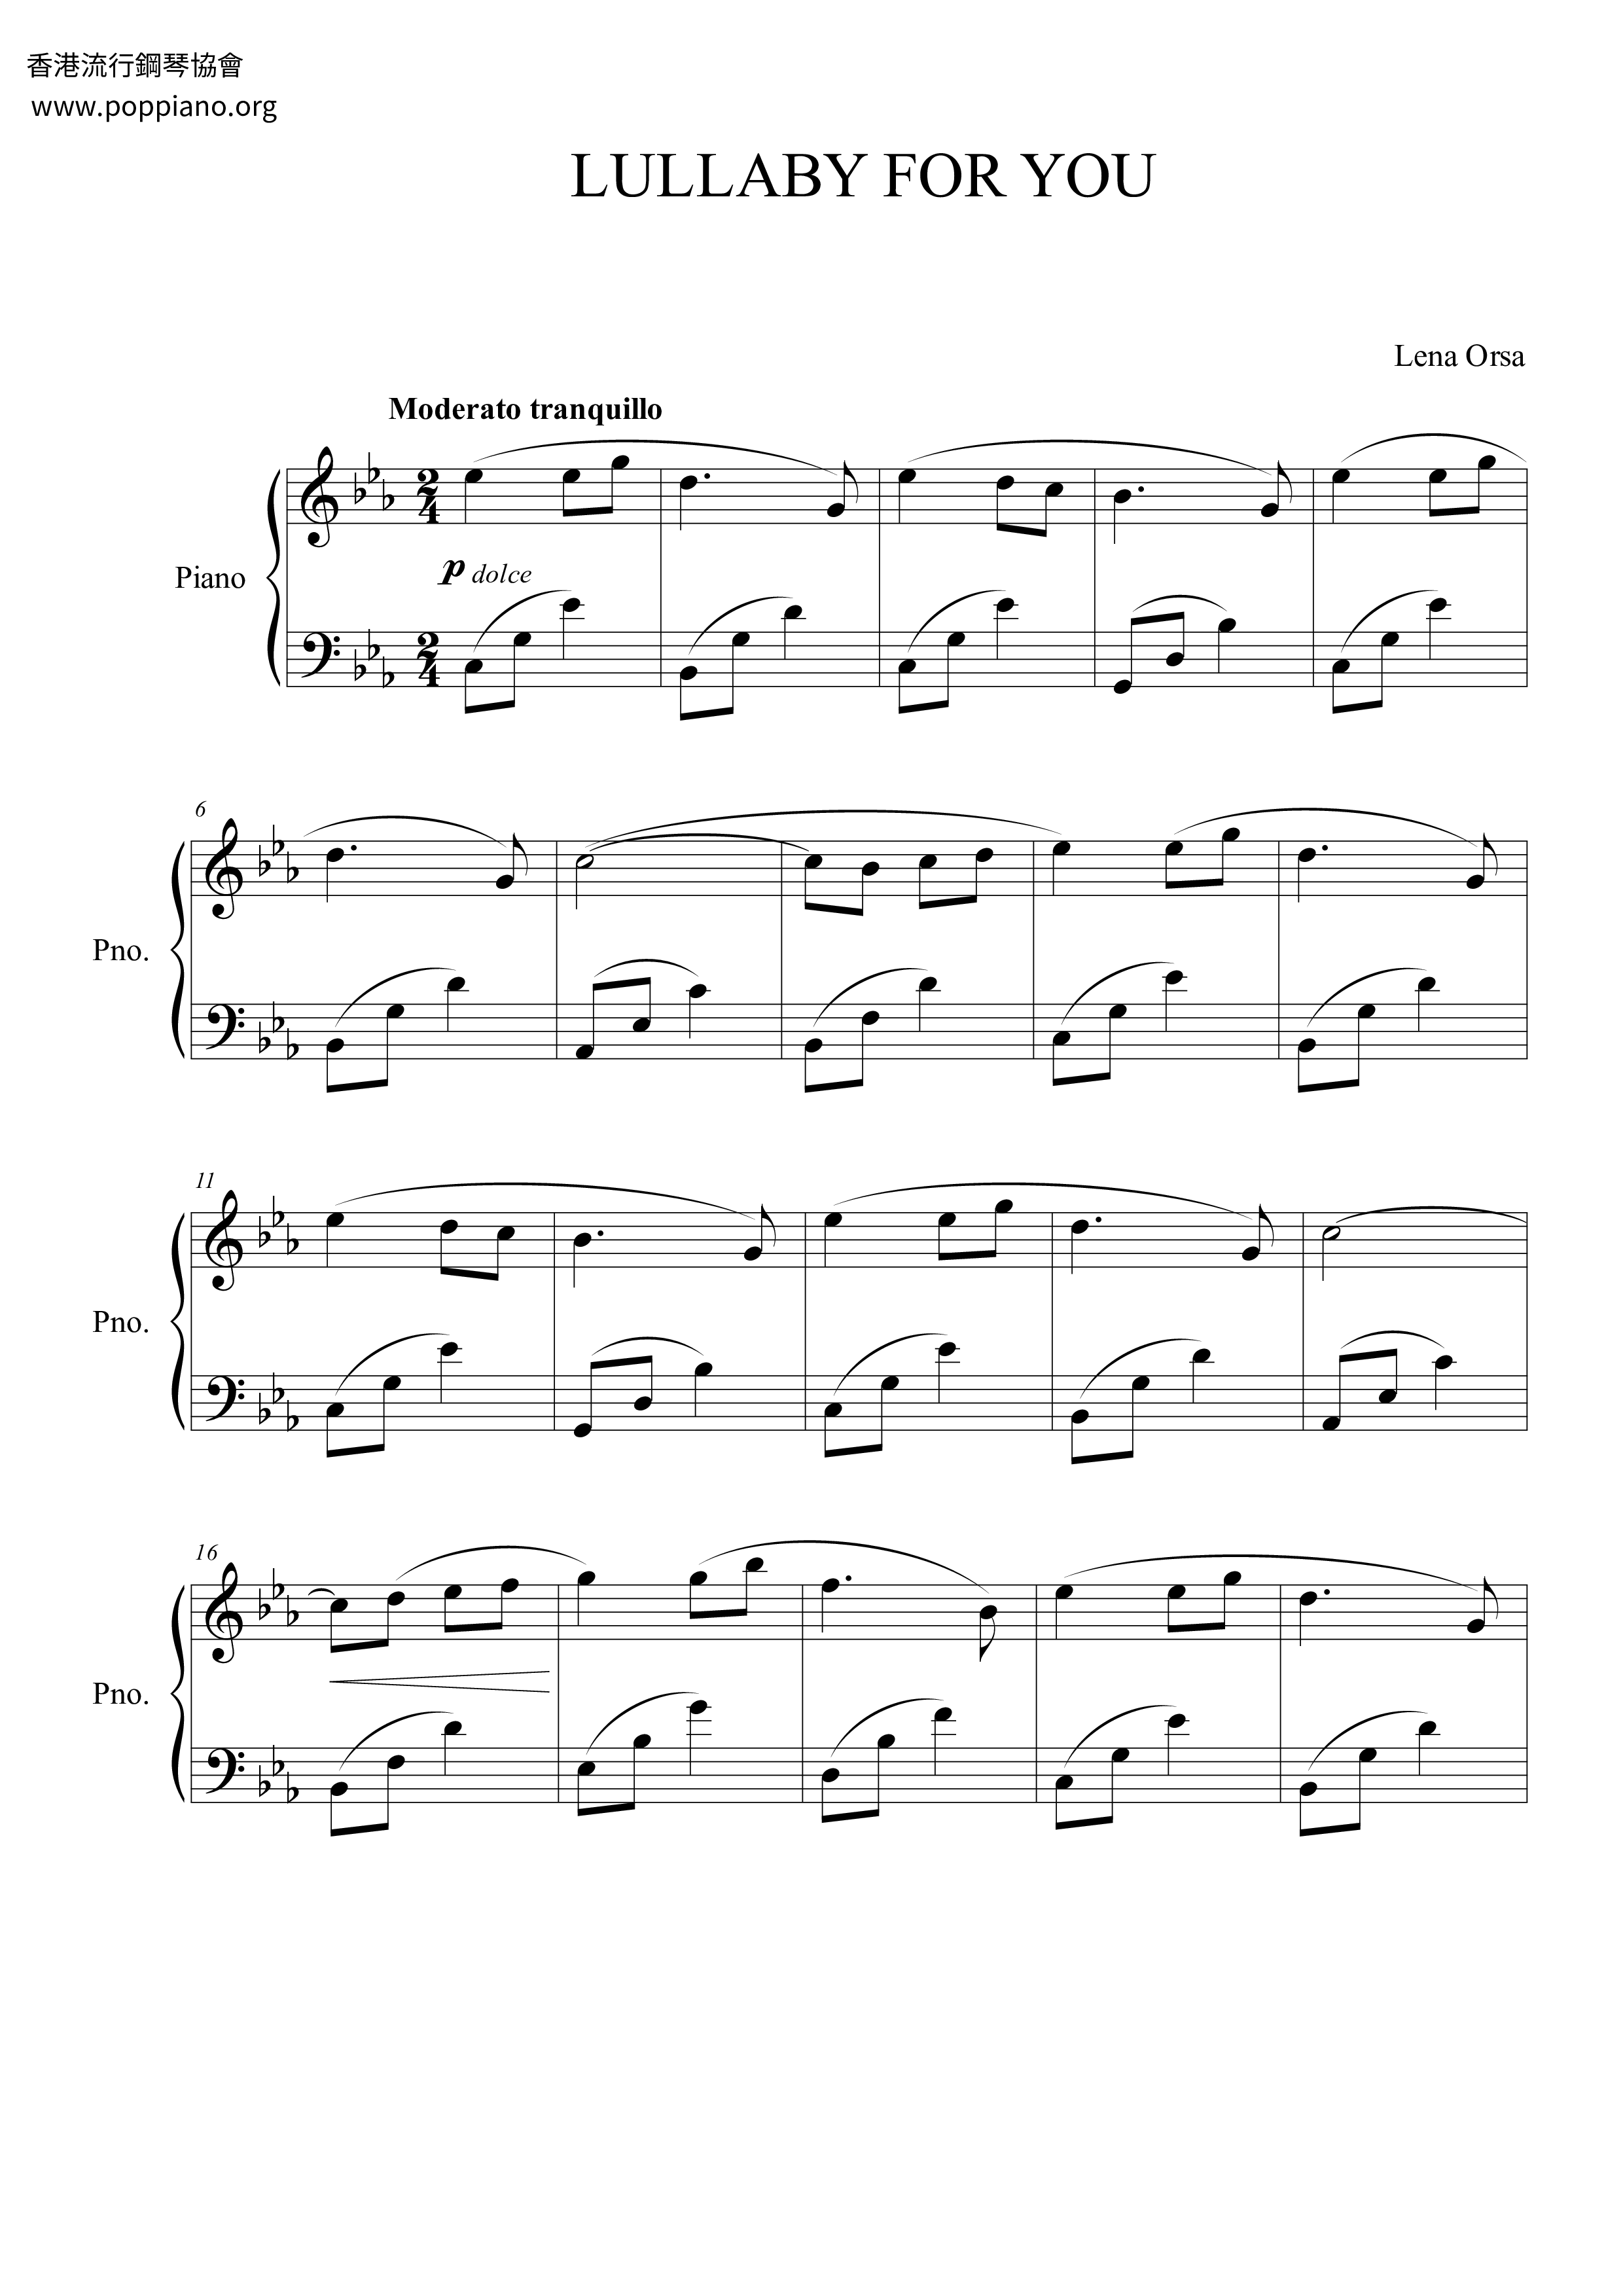 Lullaby For You Score